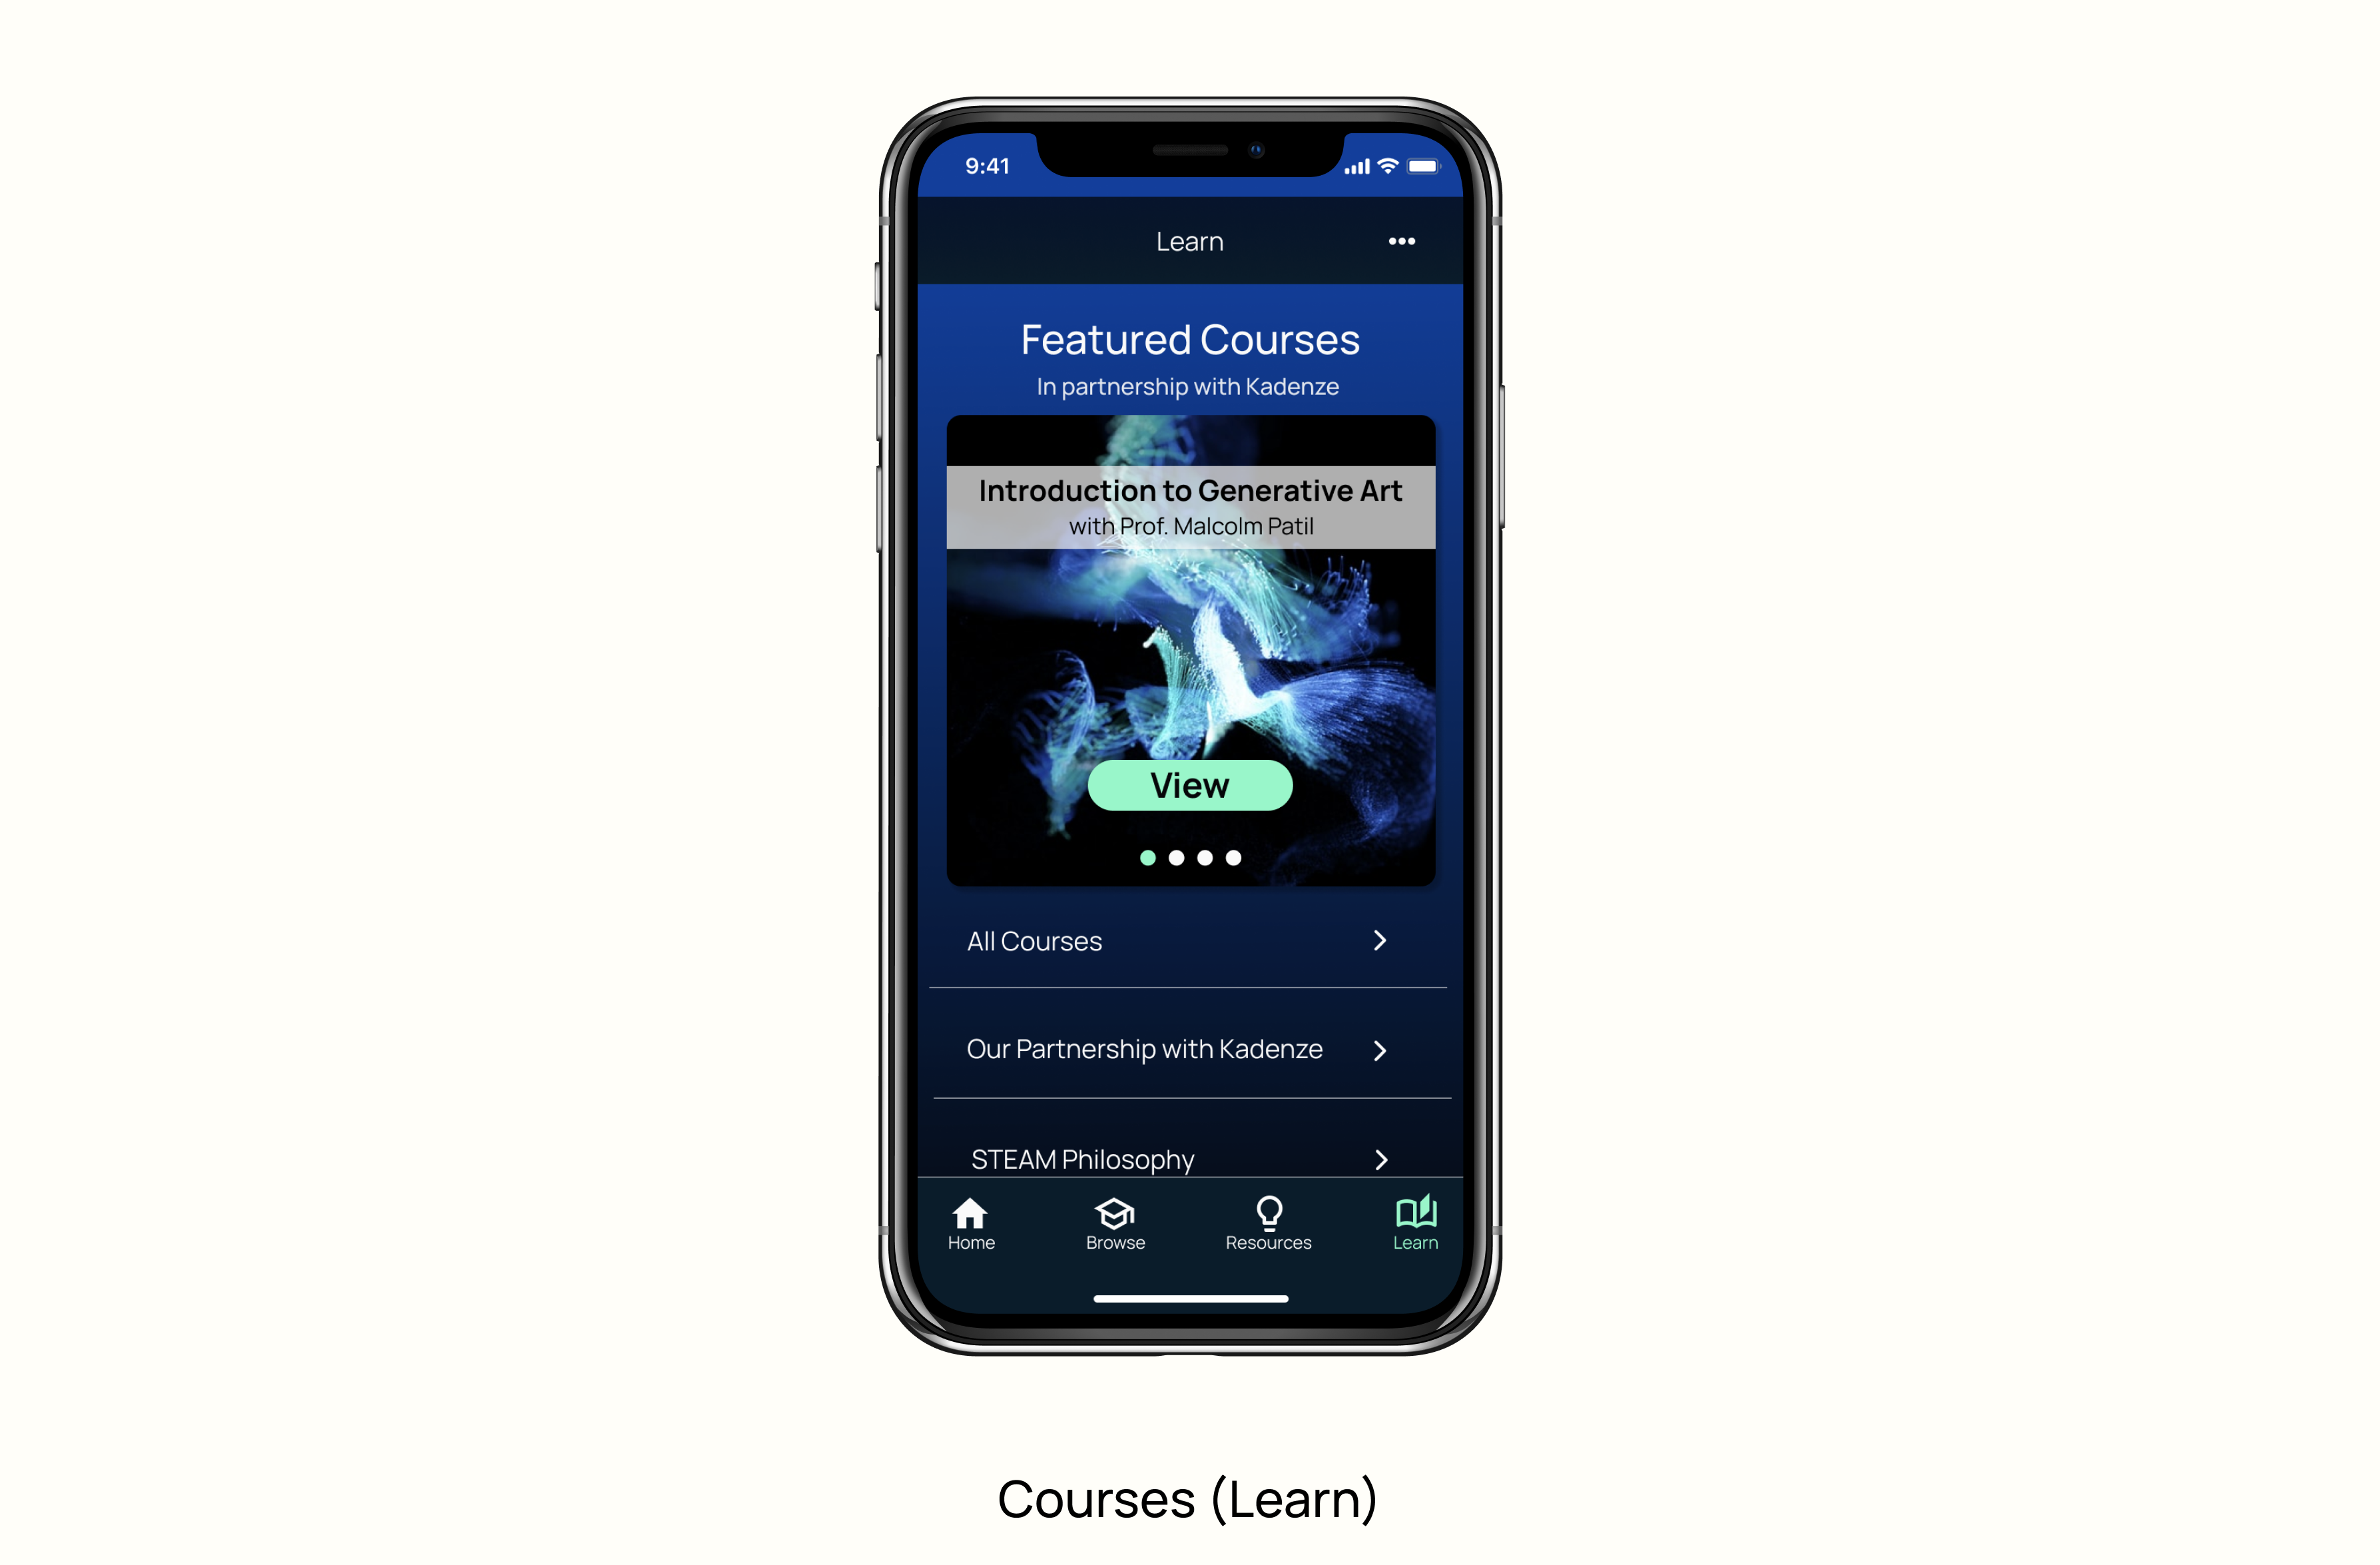 Courses (Learn)